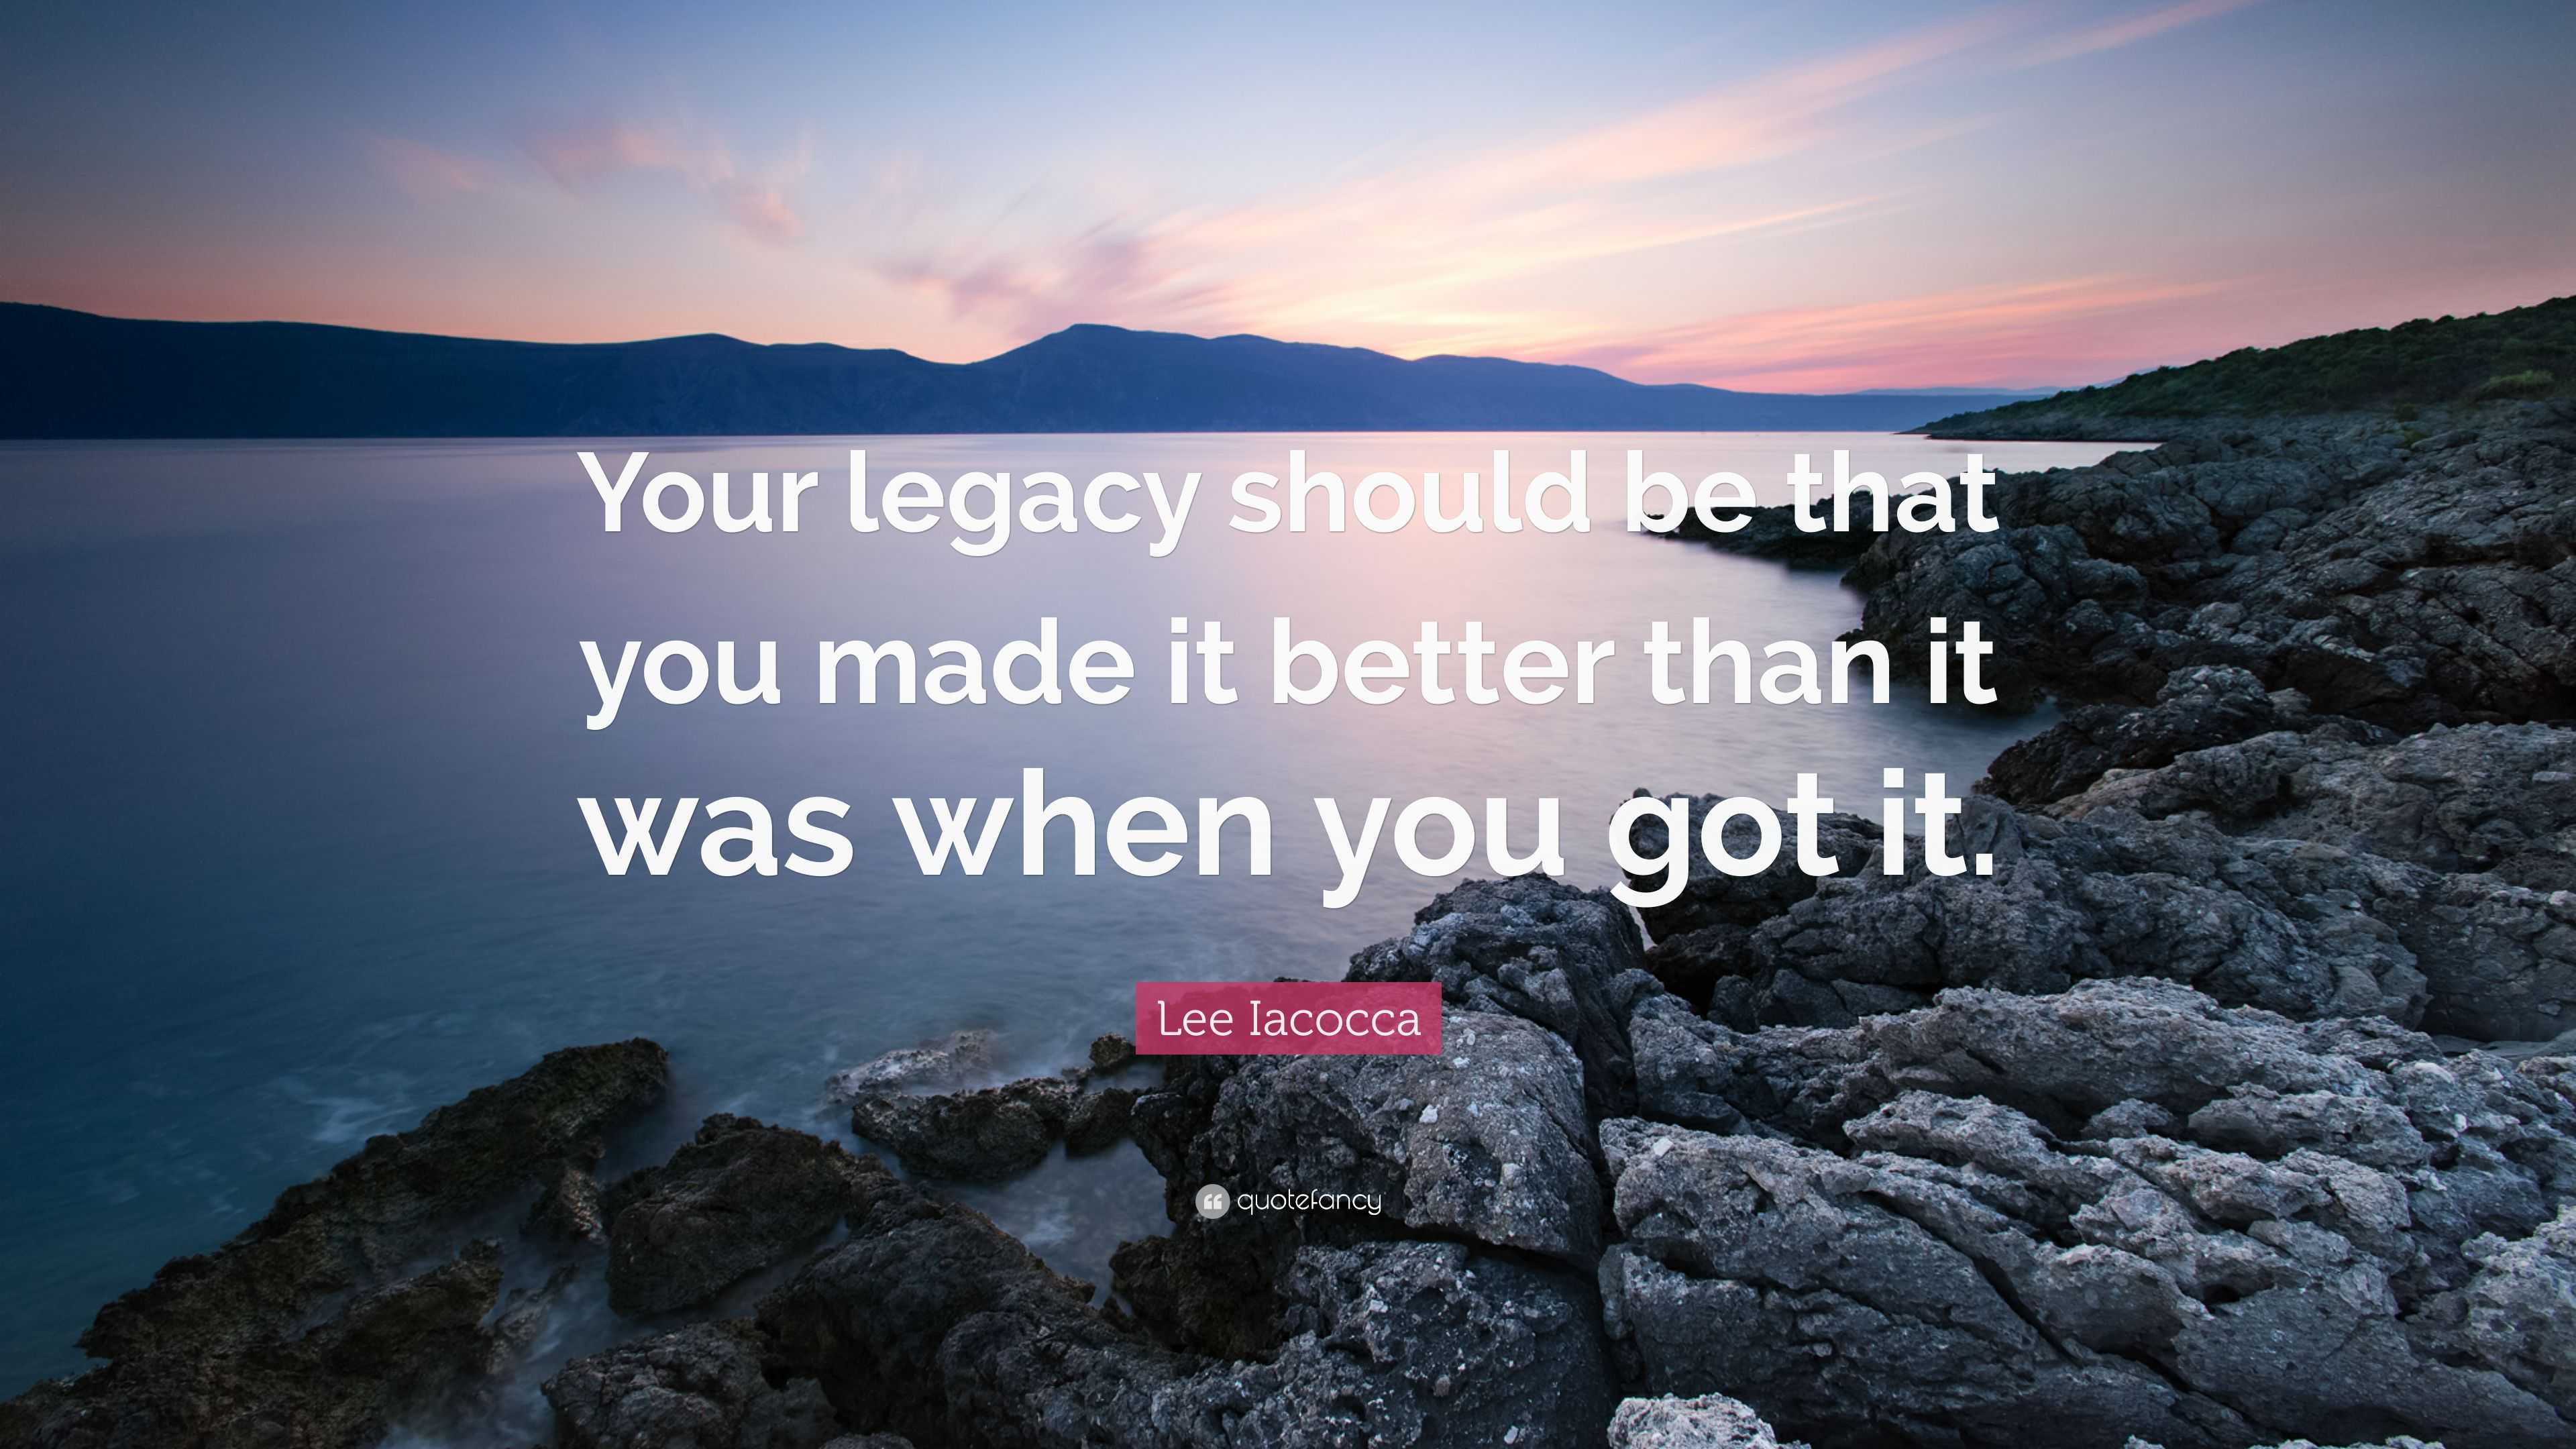 https://quotefancy.com/media/wallpaper/3840x2160/2131212-Lee-Iacocca-Quote-Your-legacy-should-be-that-you-made-it-better.jpg